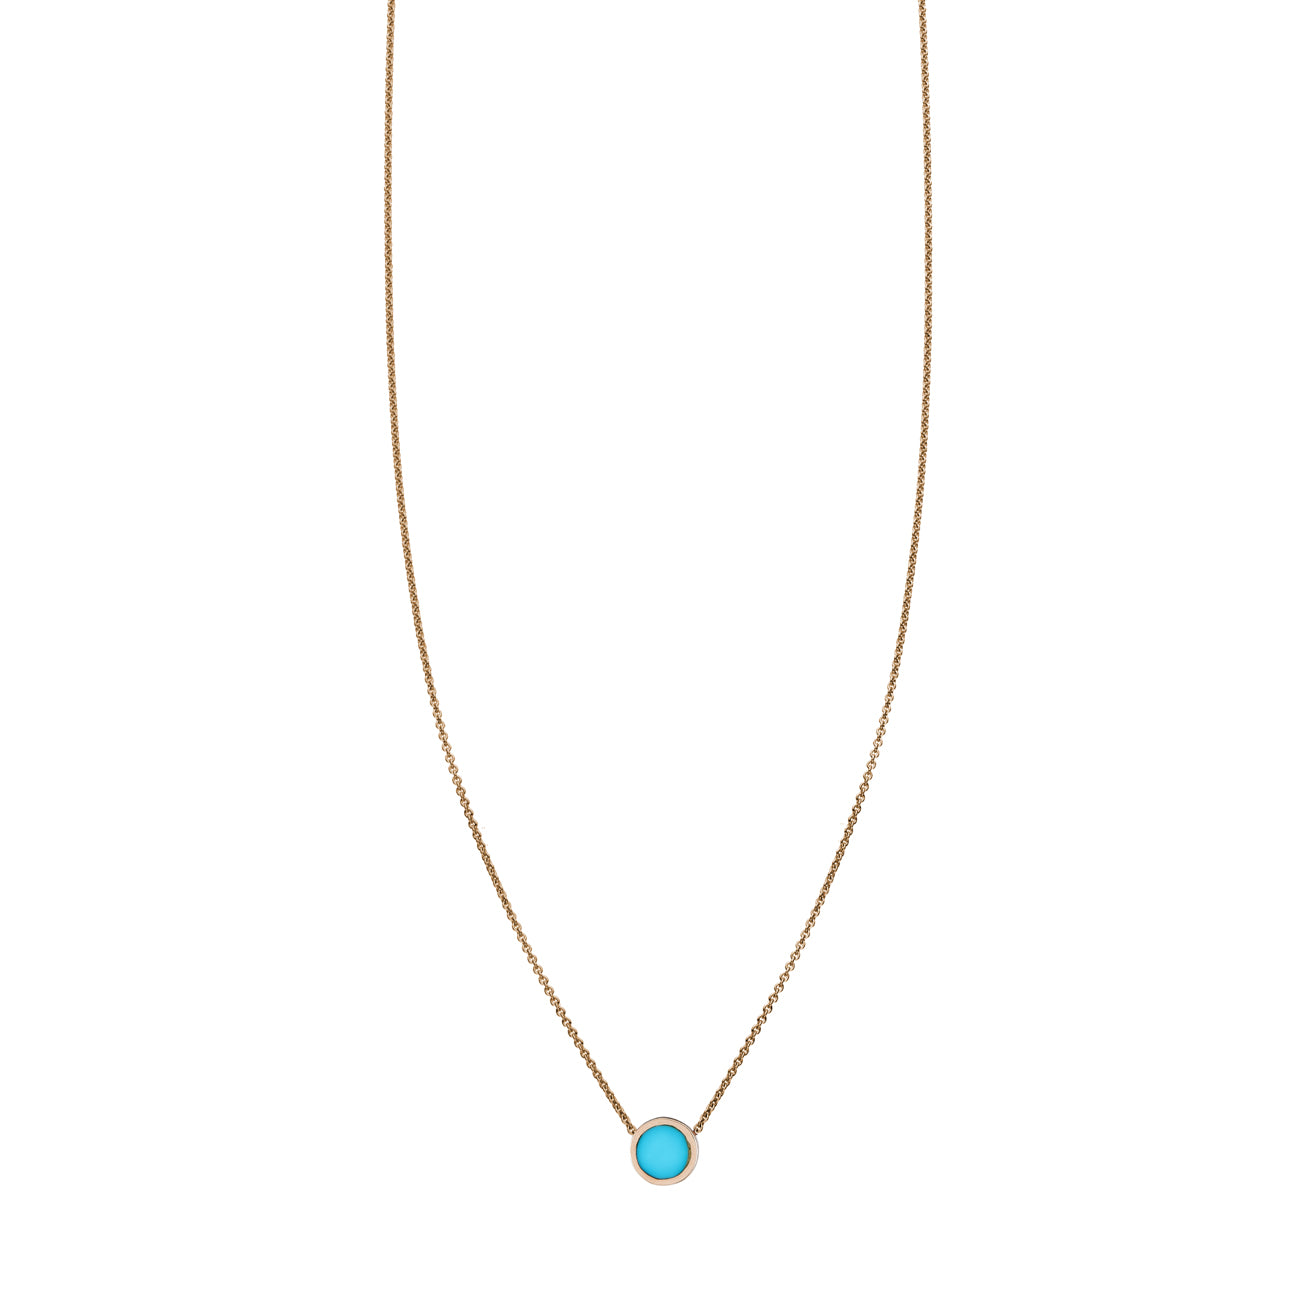 turquoise inlaid circle necklace PRN022